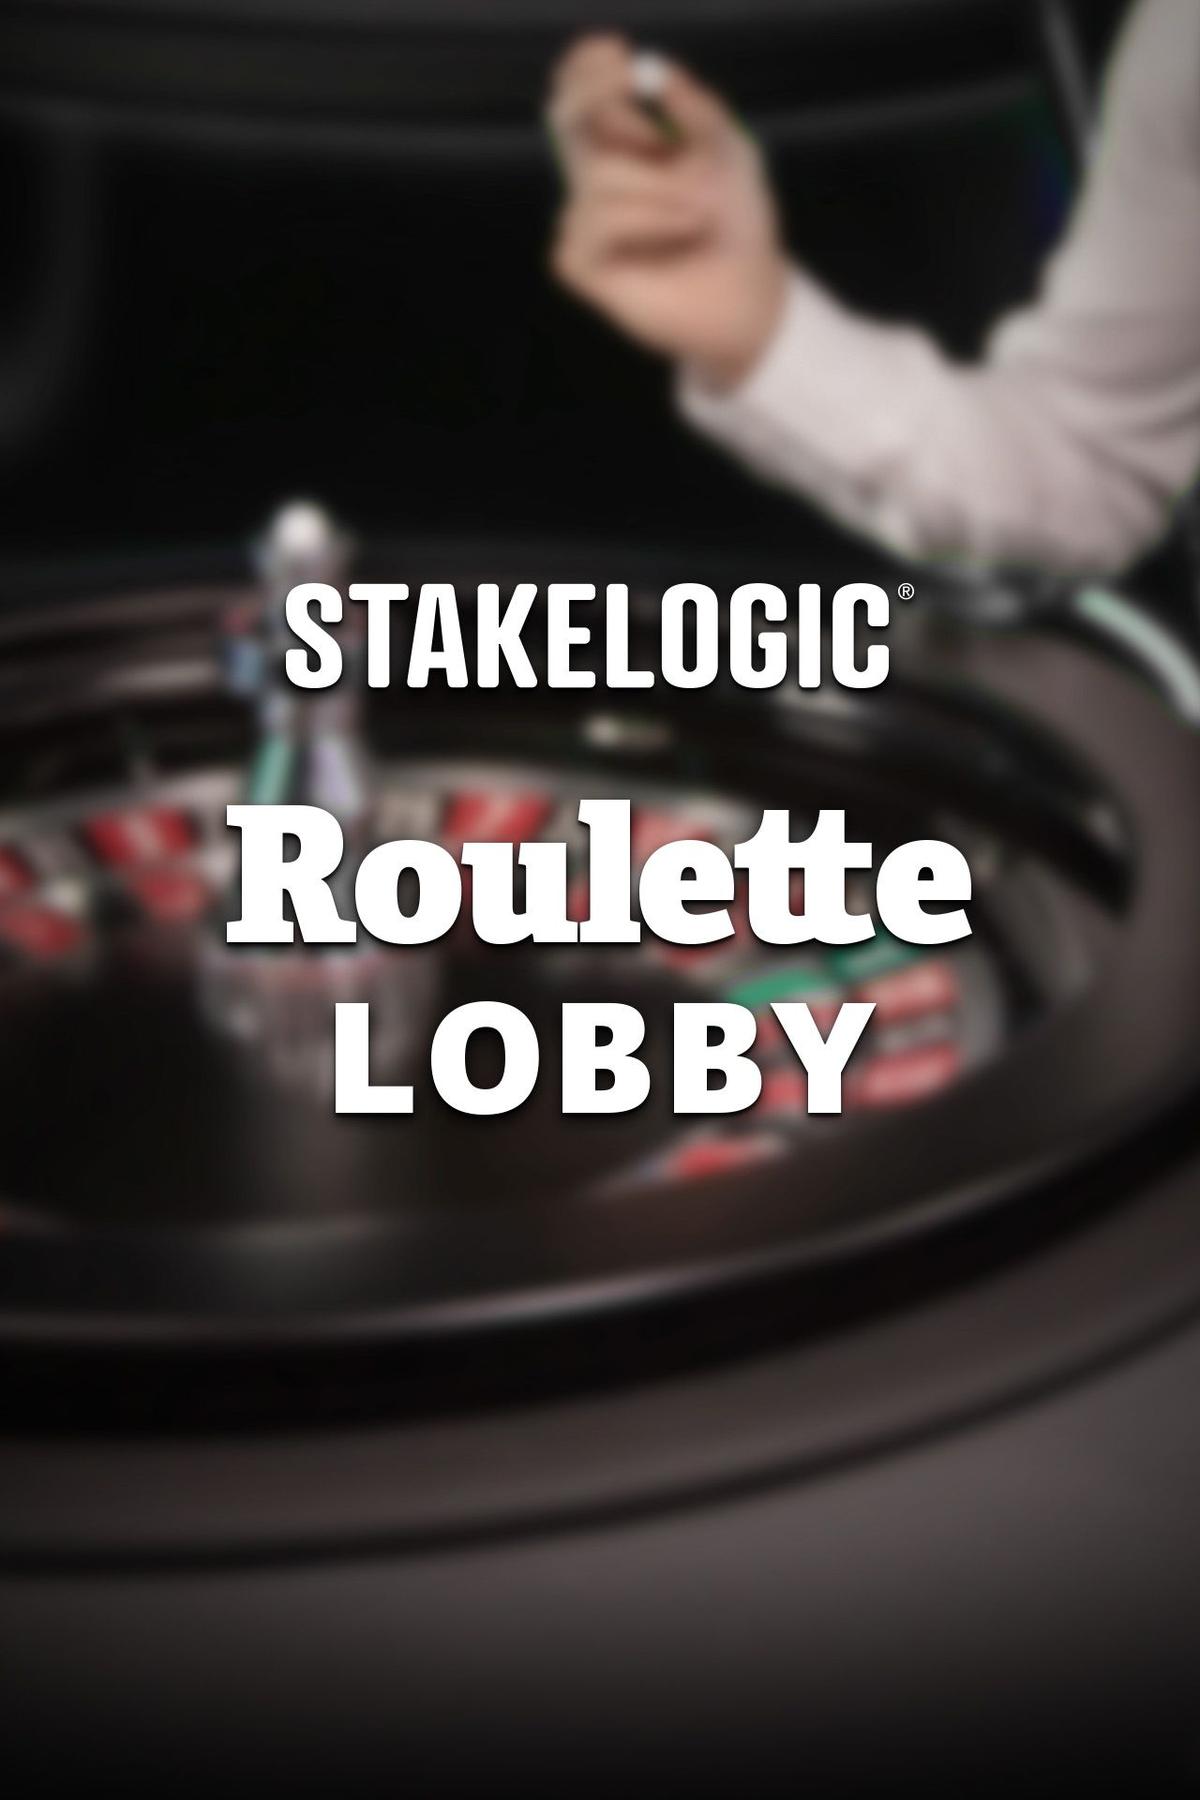 Roulette Lobby Stakelogic